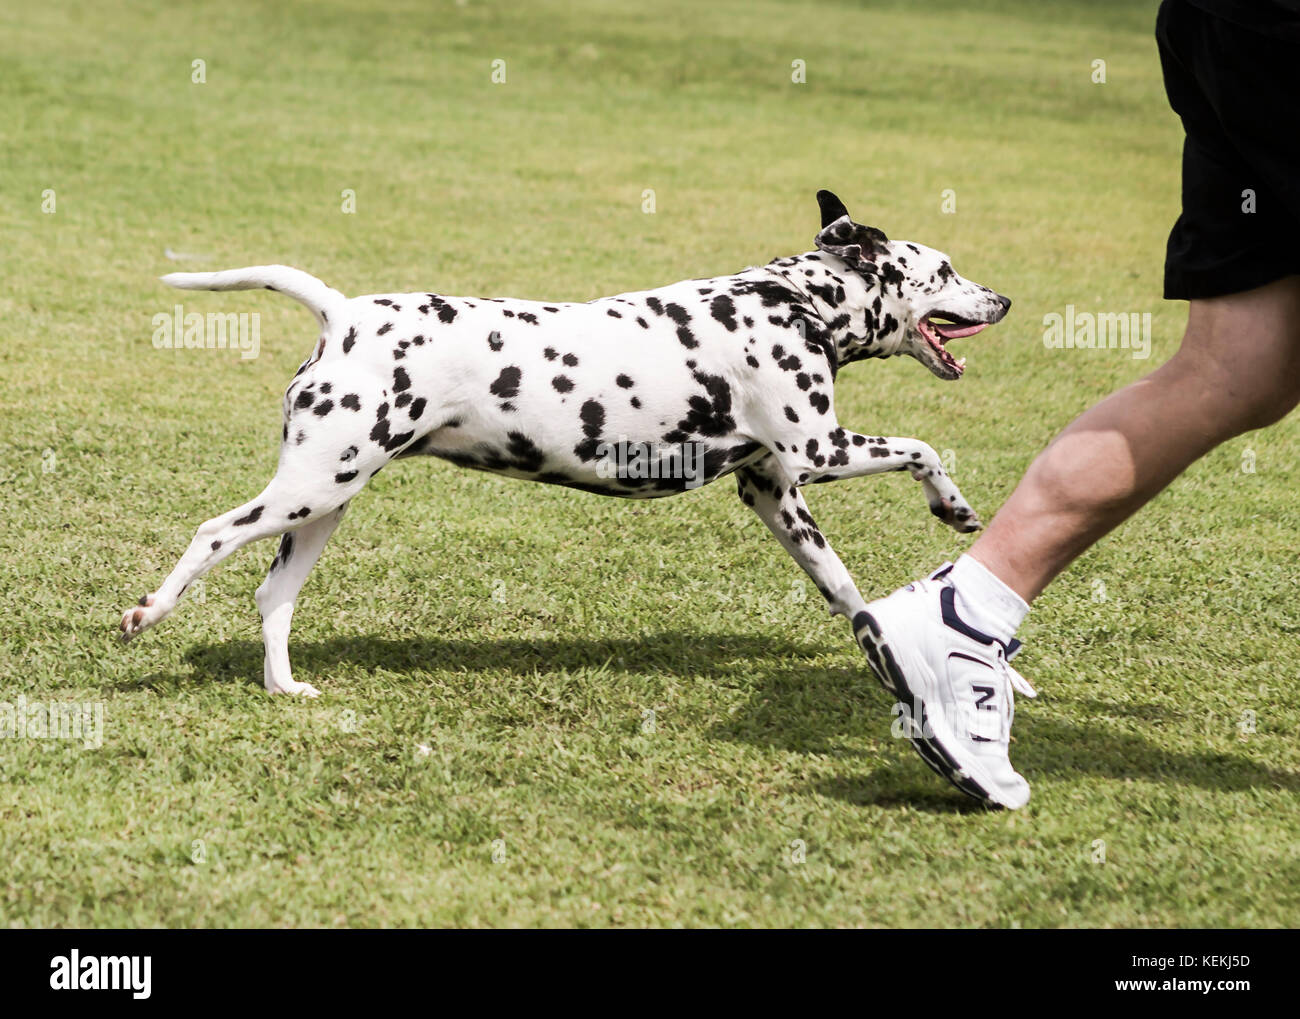 Adult man healthy activity lower section leg only running with happy dog exercises outdoors dog enjoying Summer calf of man © Myrleen Pearson Stock Photo